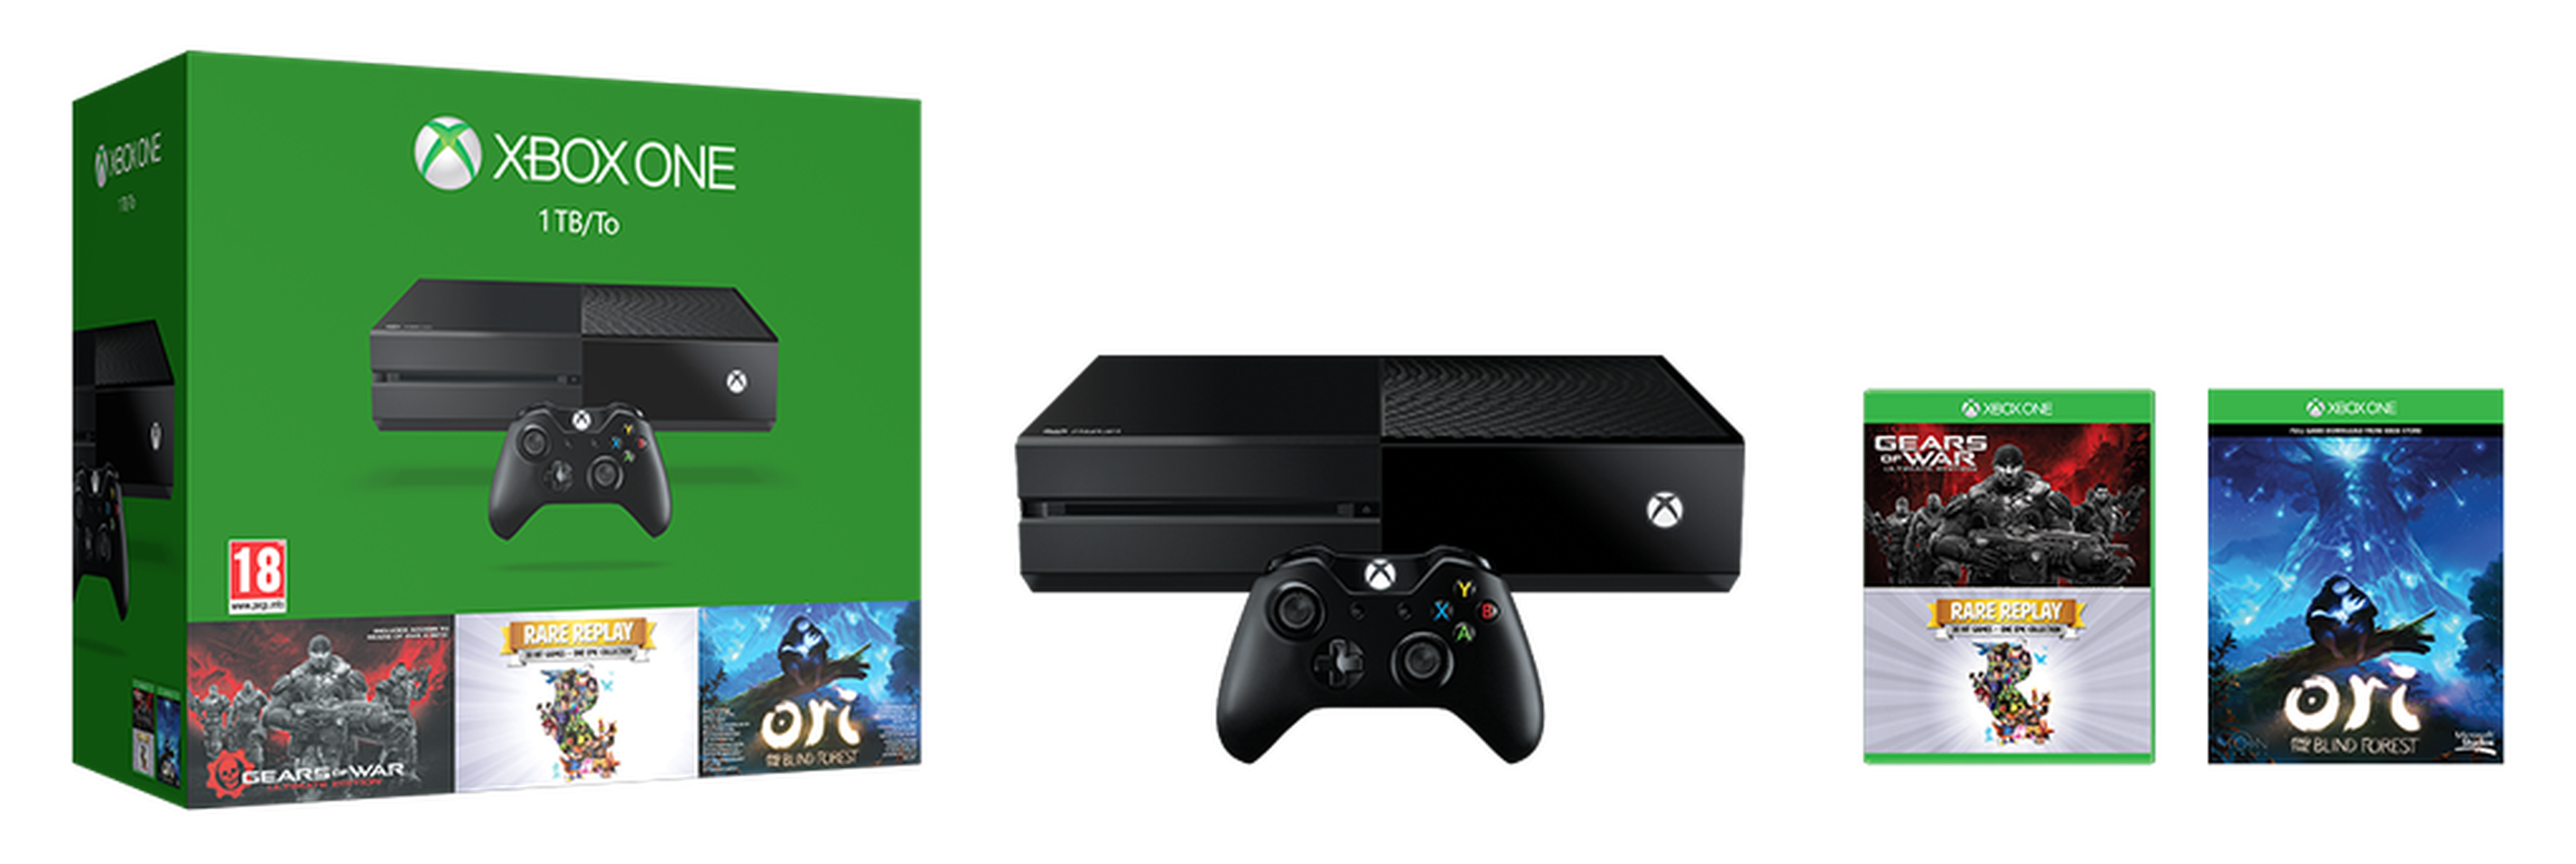 Pack de Xbox One con Gears of War Ultimate Edition + Rare Replay + Ori and the Blind Forest